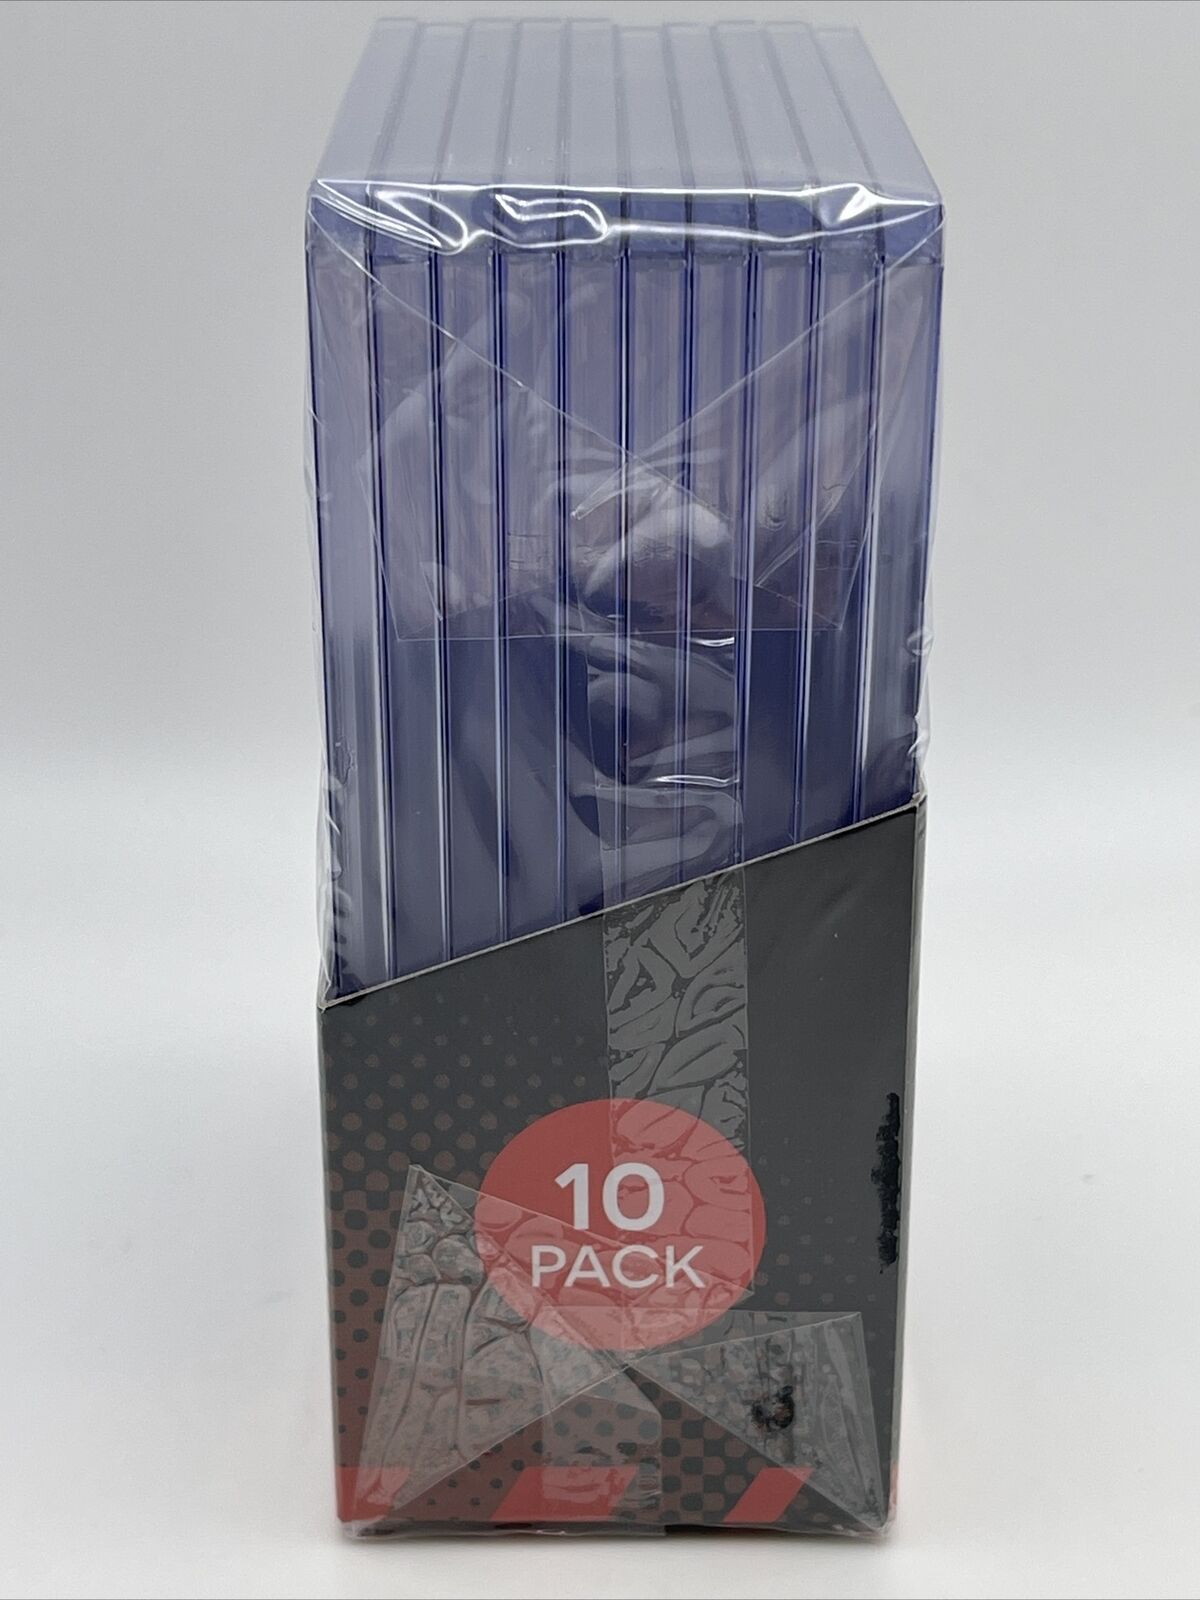 Ultra Pro 3X4 Super Thick Toploaders 130pt Point 1 Pack of 10 for Thick Cards